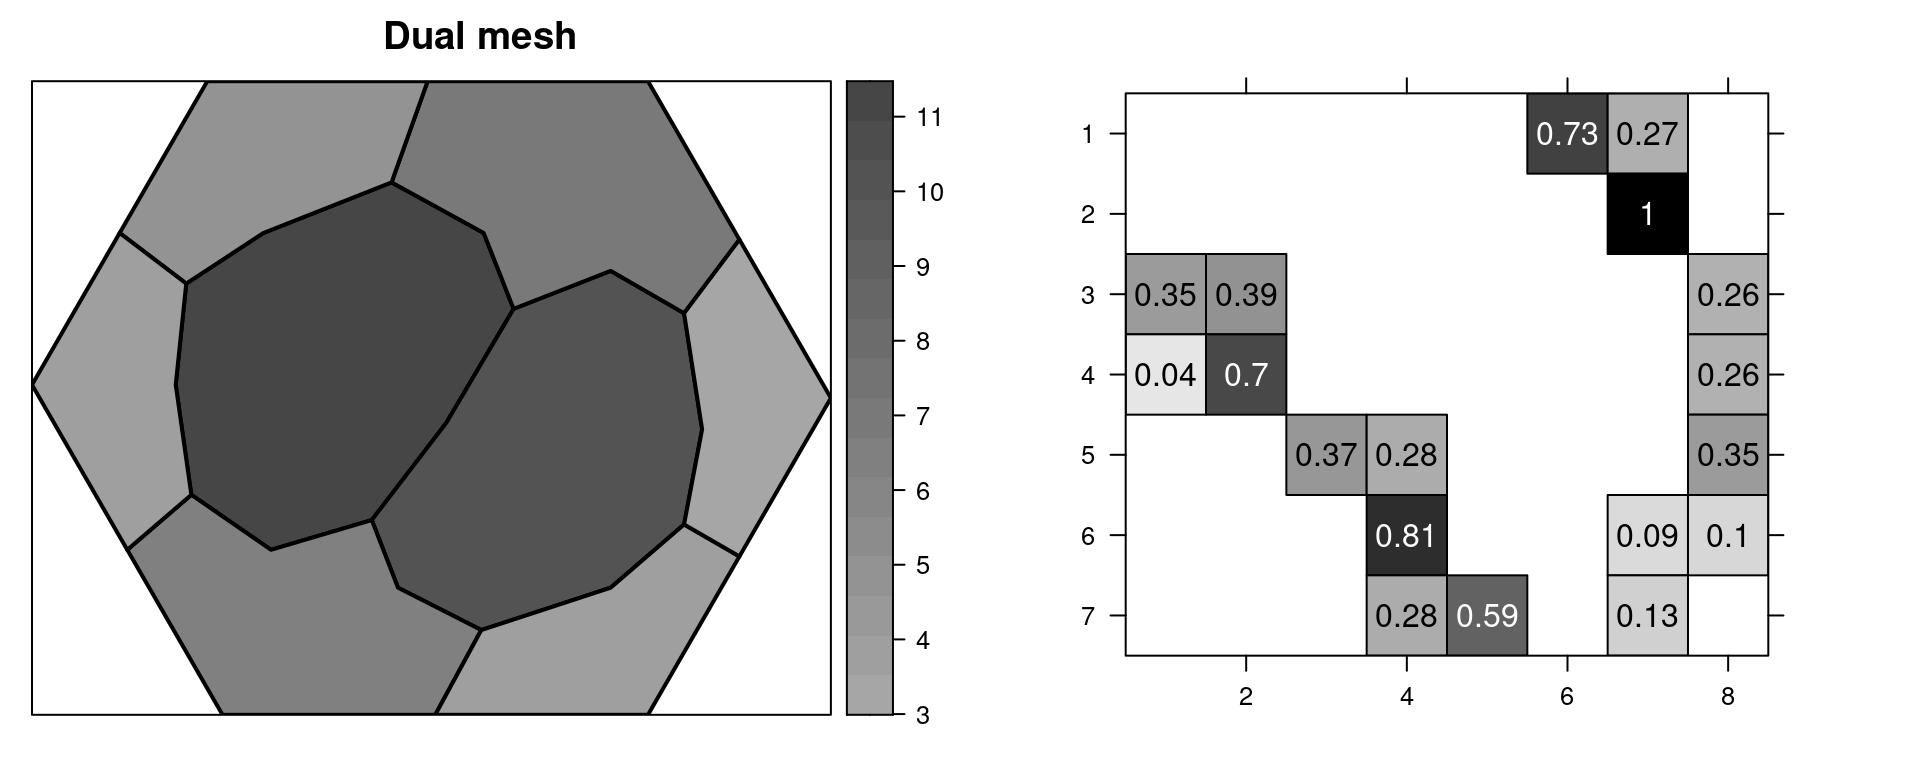 A mesh and its nodes numbered (top left) and the mesh with some points numbered (top right). The dual mesh polygons (mid left) and $\mathbf{A}$ matrix (mid right). The associated $\mathbf{C}$ matrix (bottom left) and $\mathbf{G}$ matrix (bottom center).